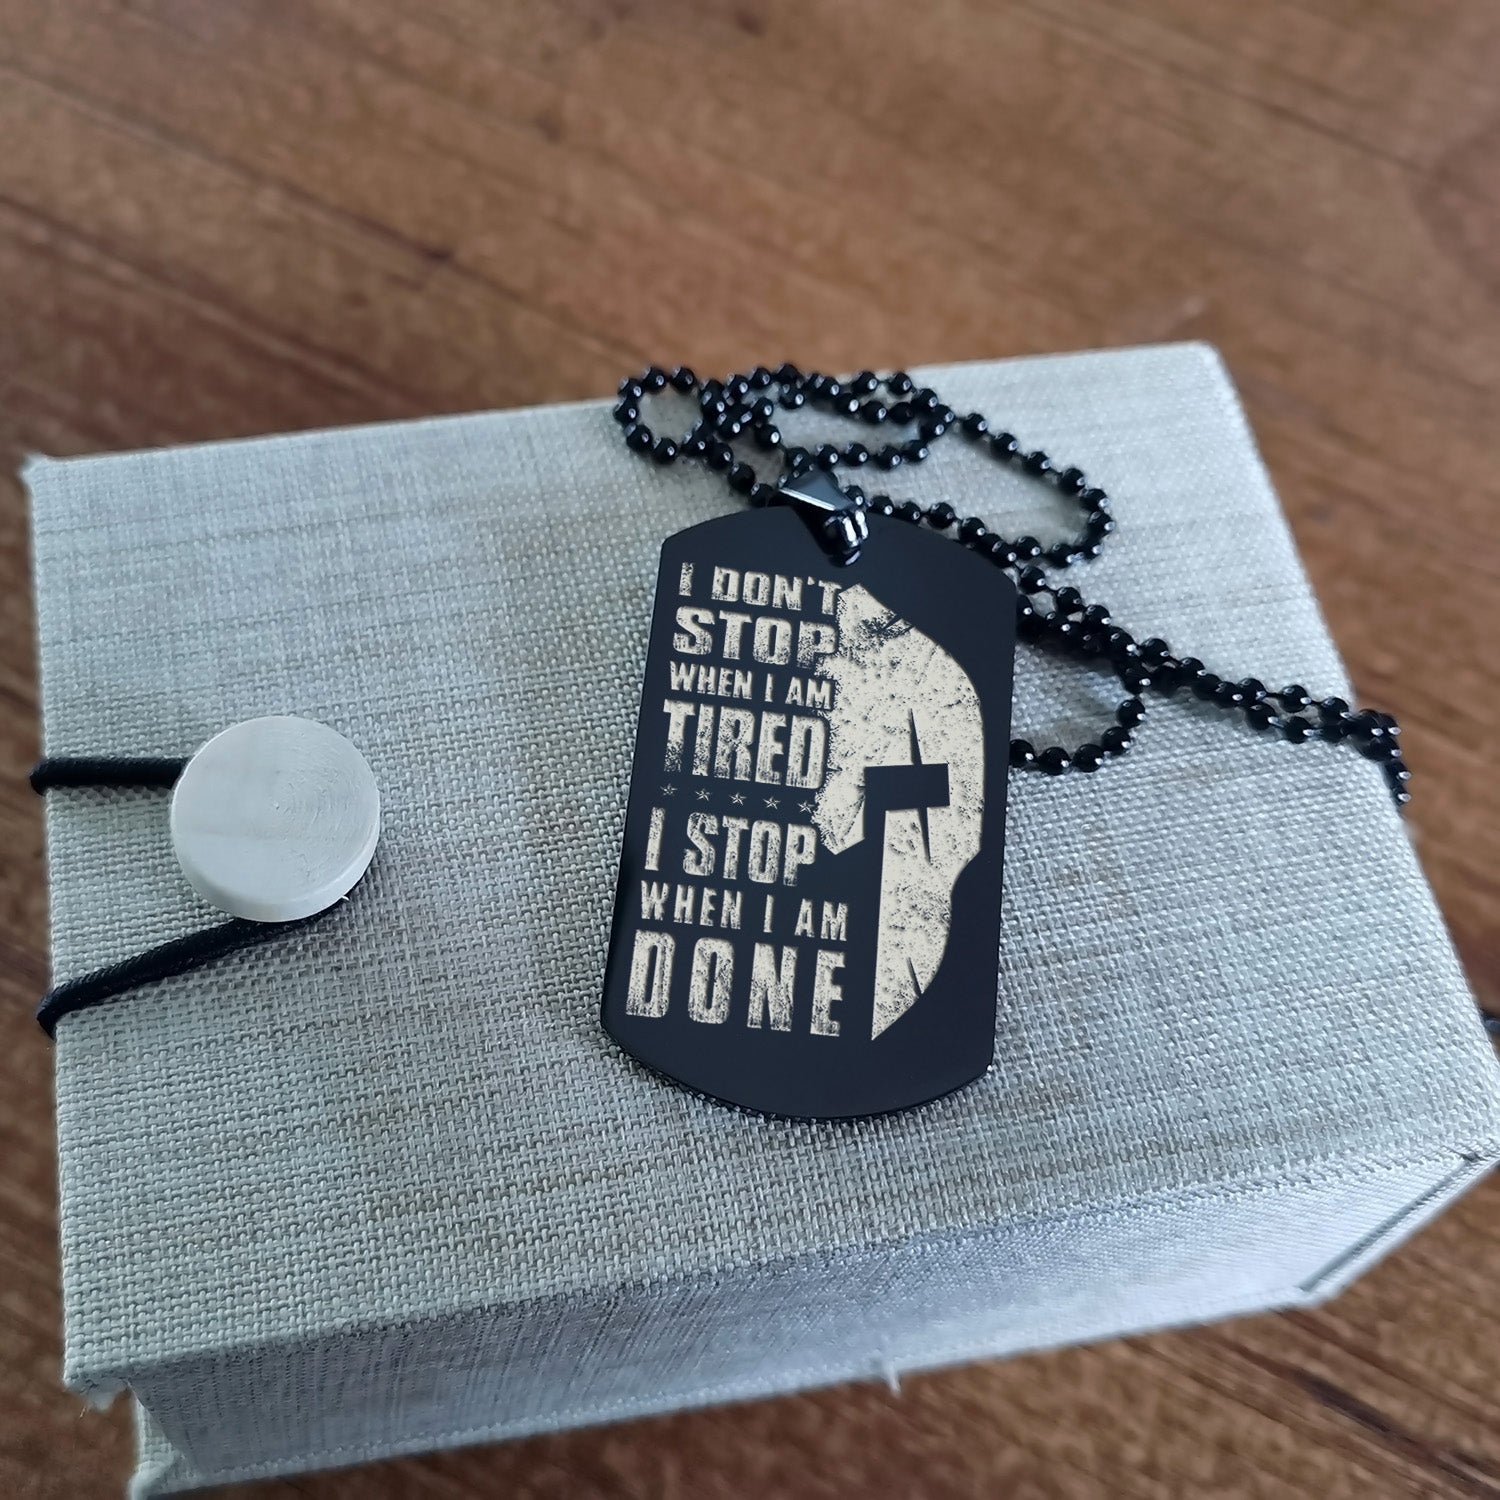 WAD047 - Quitting Is Not - I Don't Stop When I Am Tired - I Stop When I Am Done - Spartan - Warrior - Engrave Double Black Dog Tag